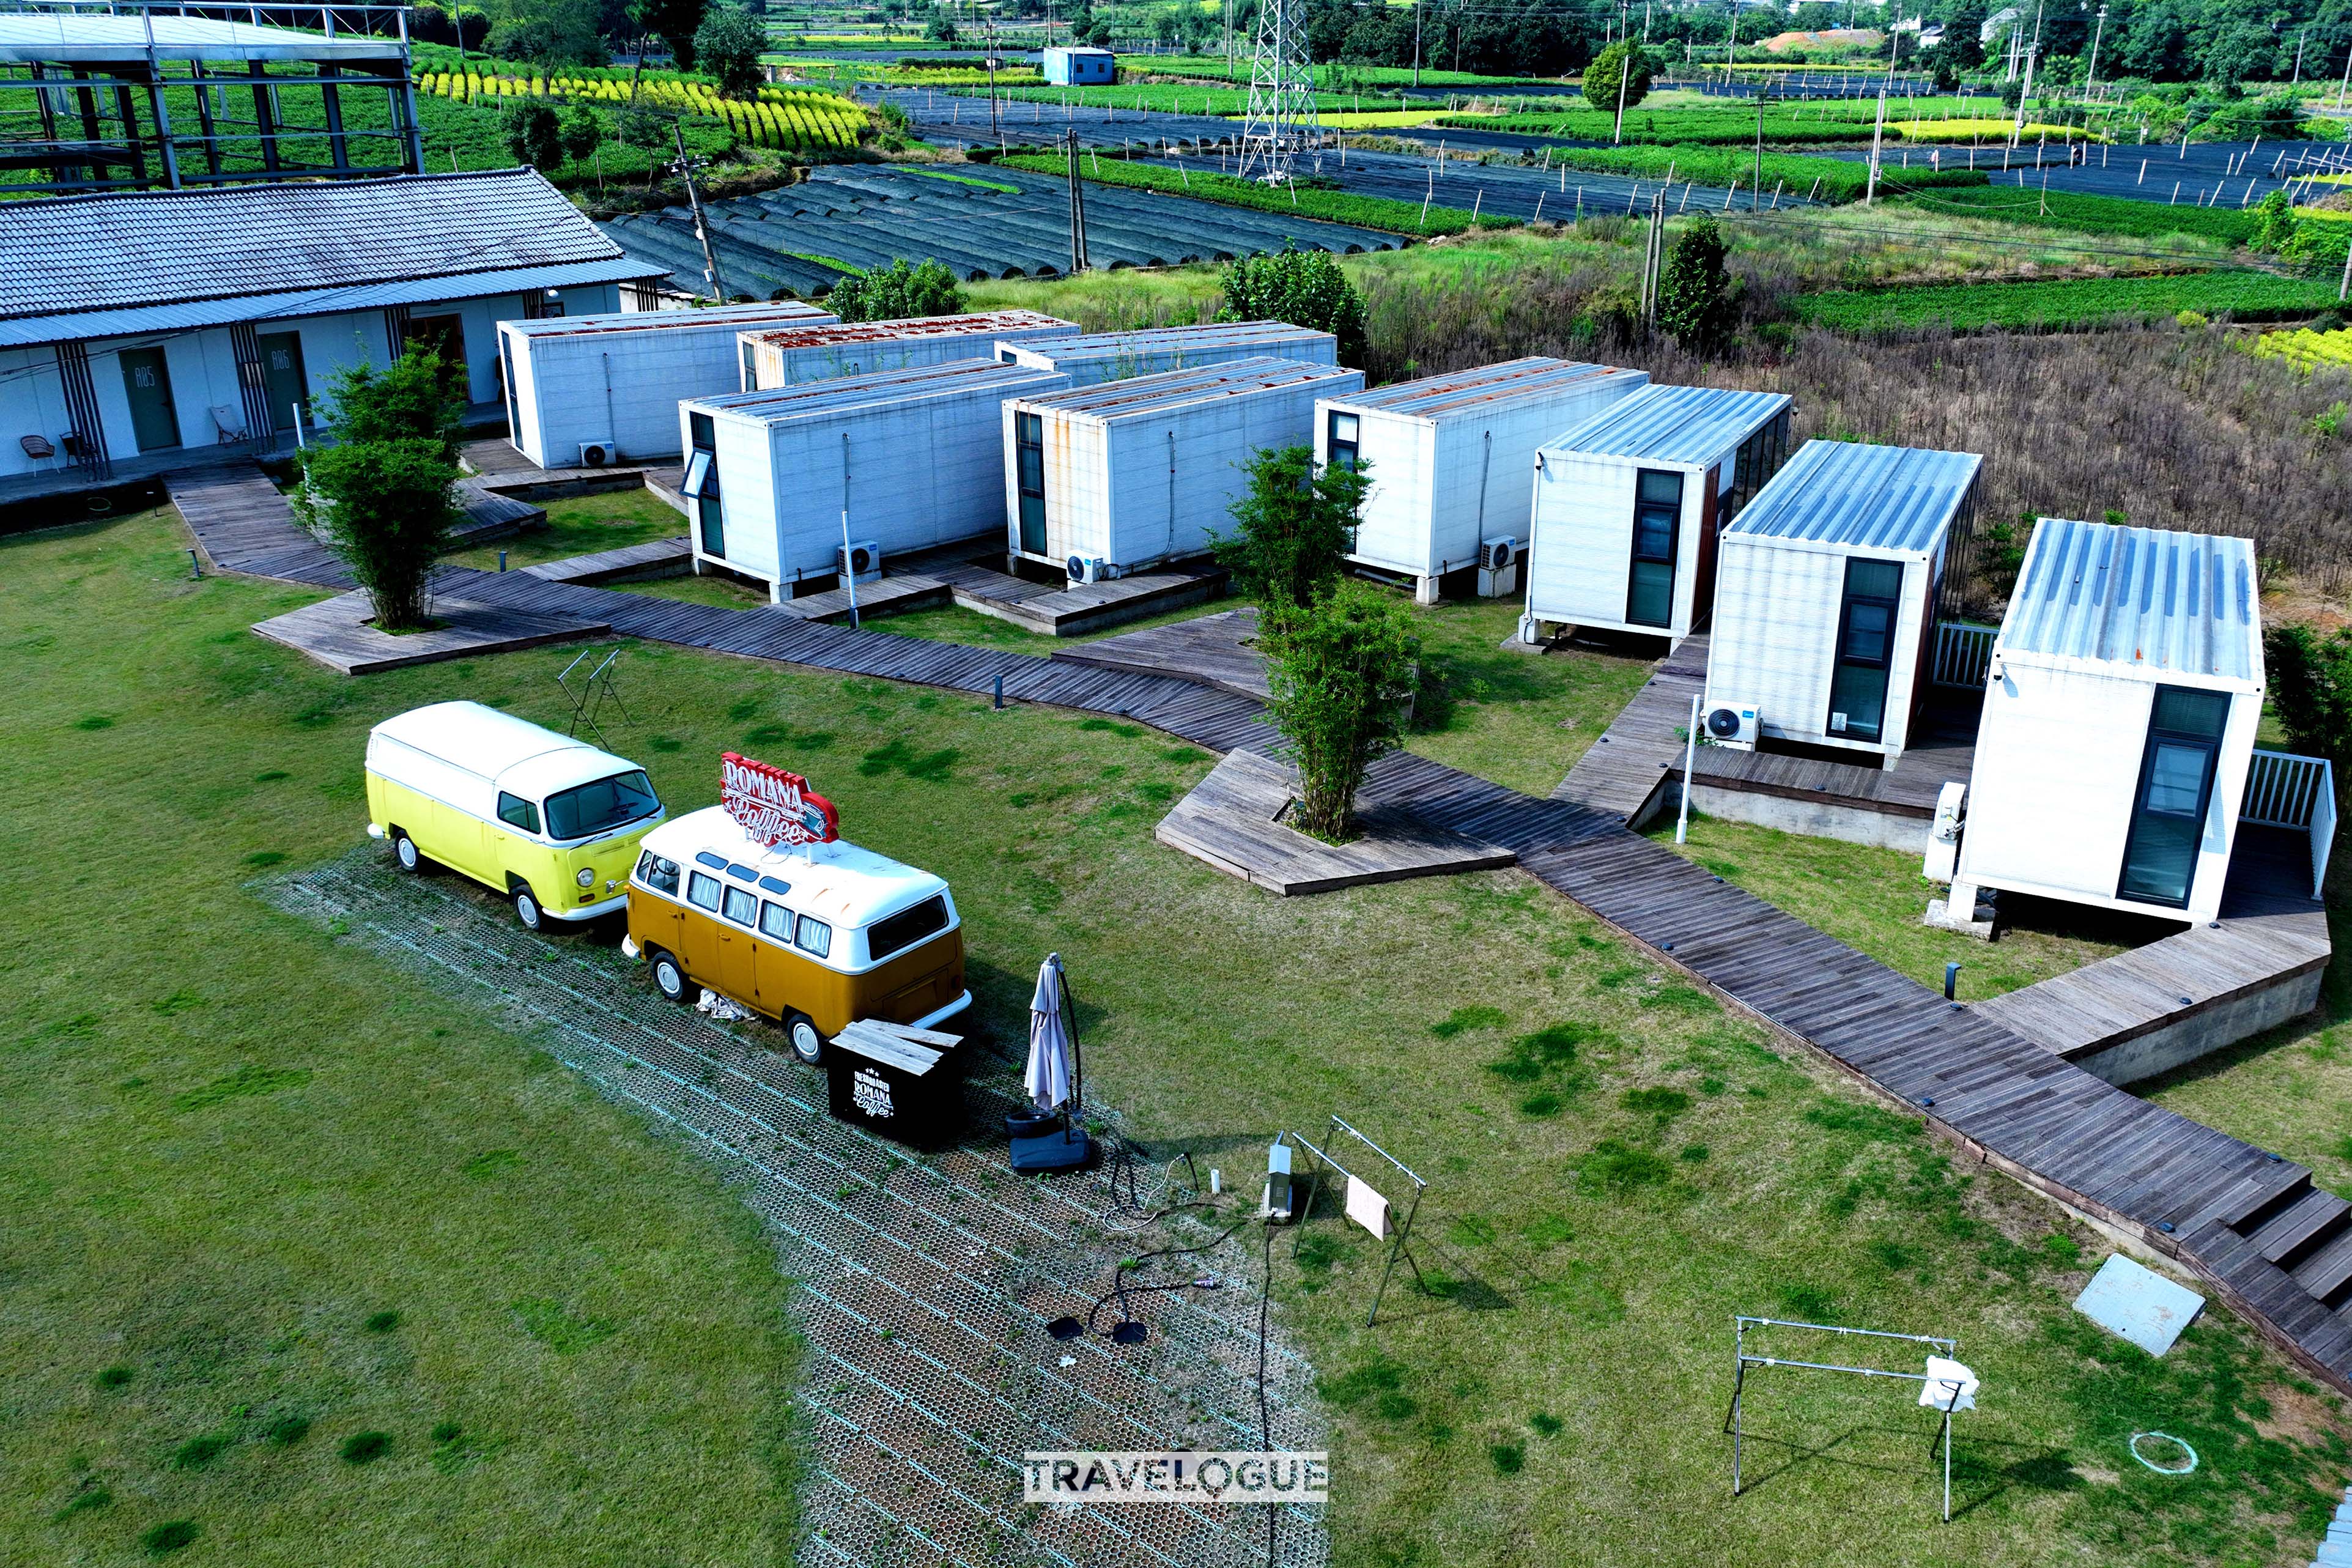 Container homes and vans inhabited by digital nomads in Anji, Zhejiang Province. /CGTN